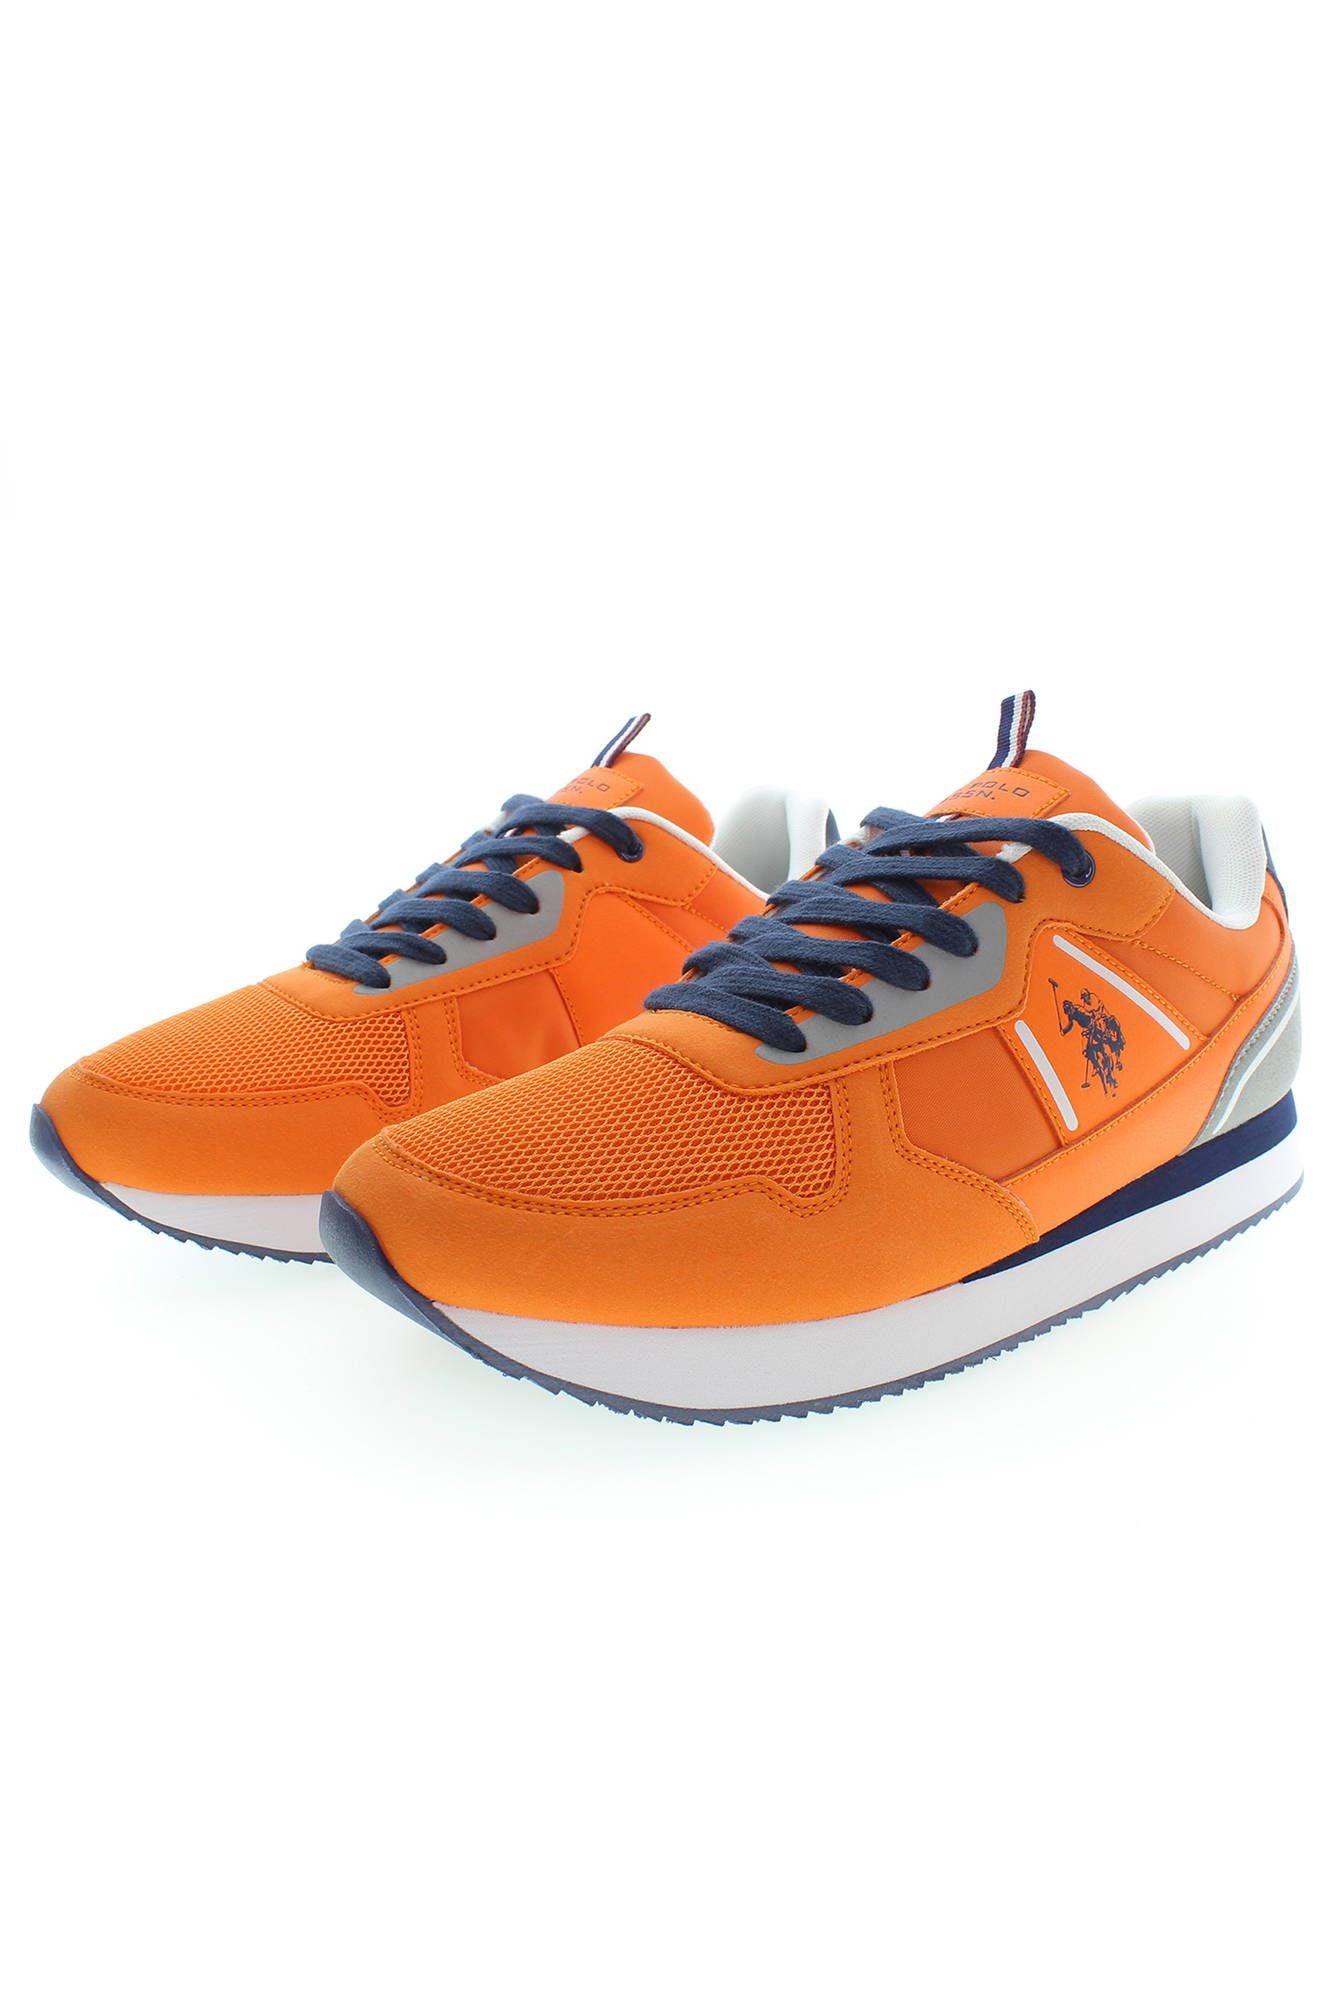 U.S. POLO ASSN. Orange Lace-Up Sports Sneakers with Logo Detail